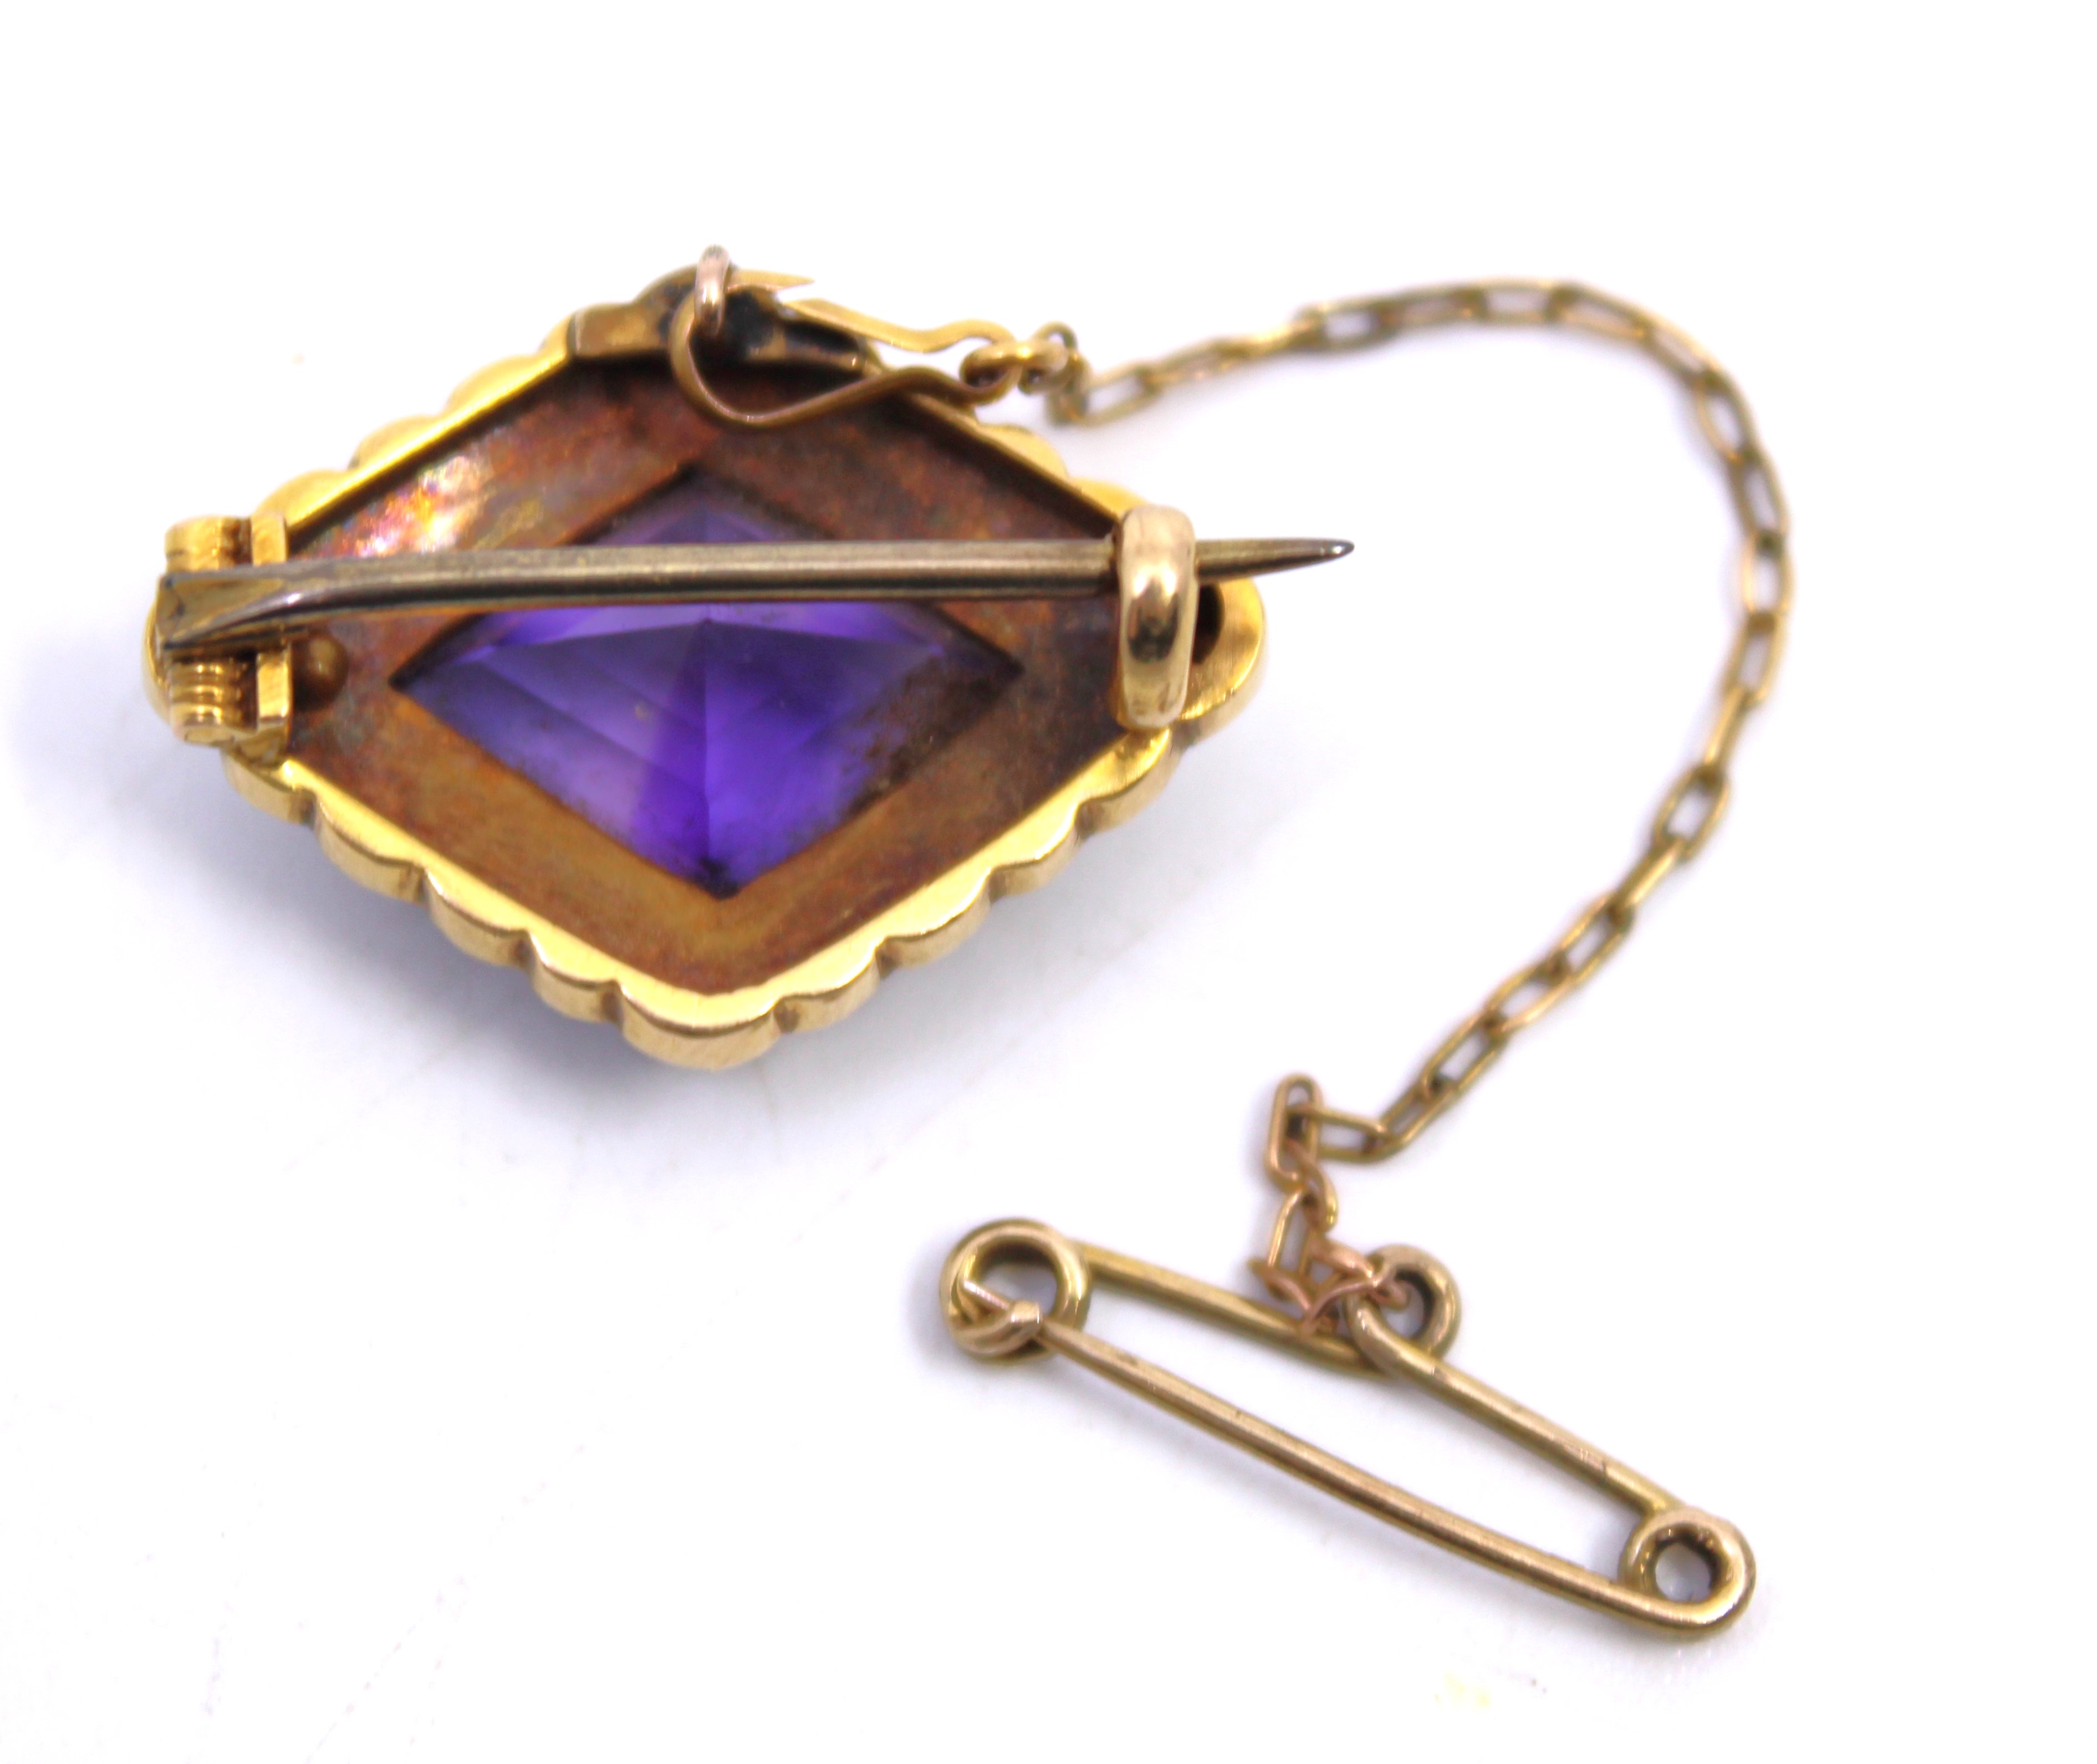 9ct Yellow Gold Kite Shaped Lozenge Amethyst and Seed Pearl Brooch with safety chain. The brooch - Image 3 of 3